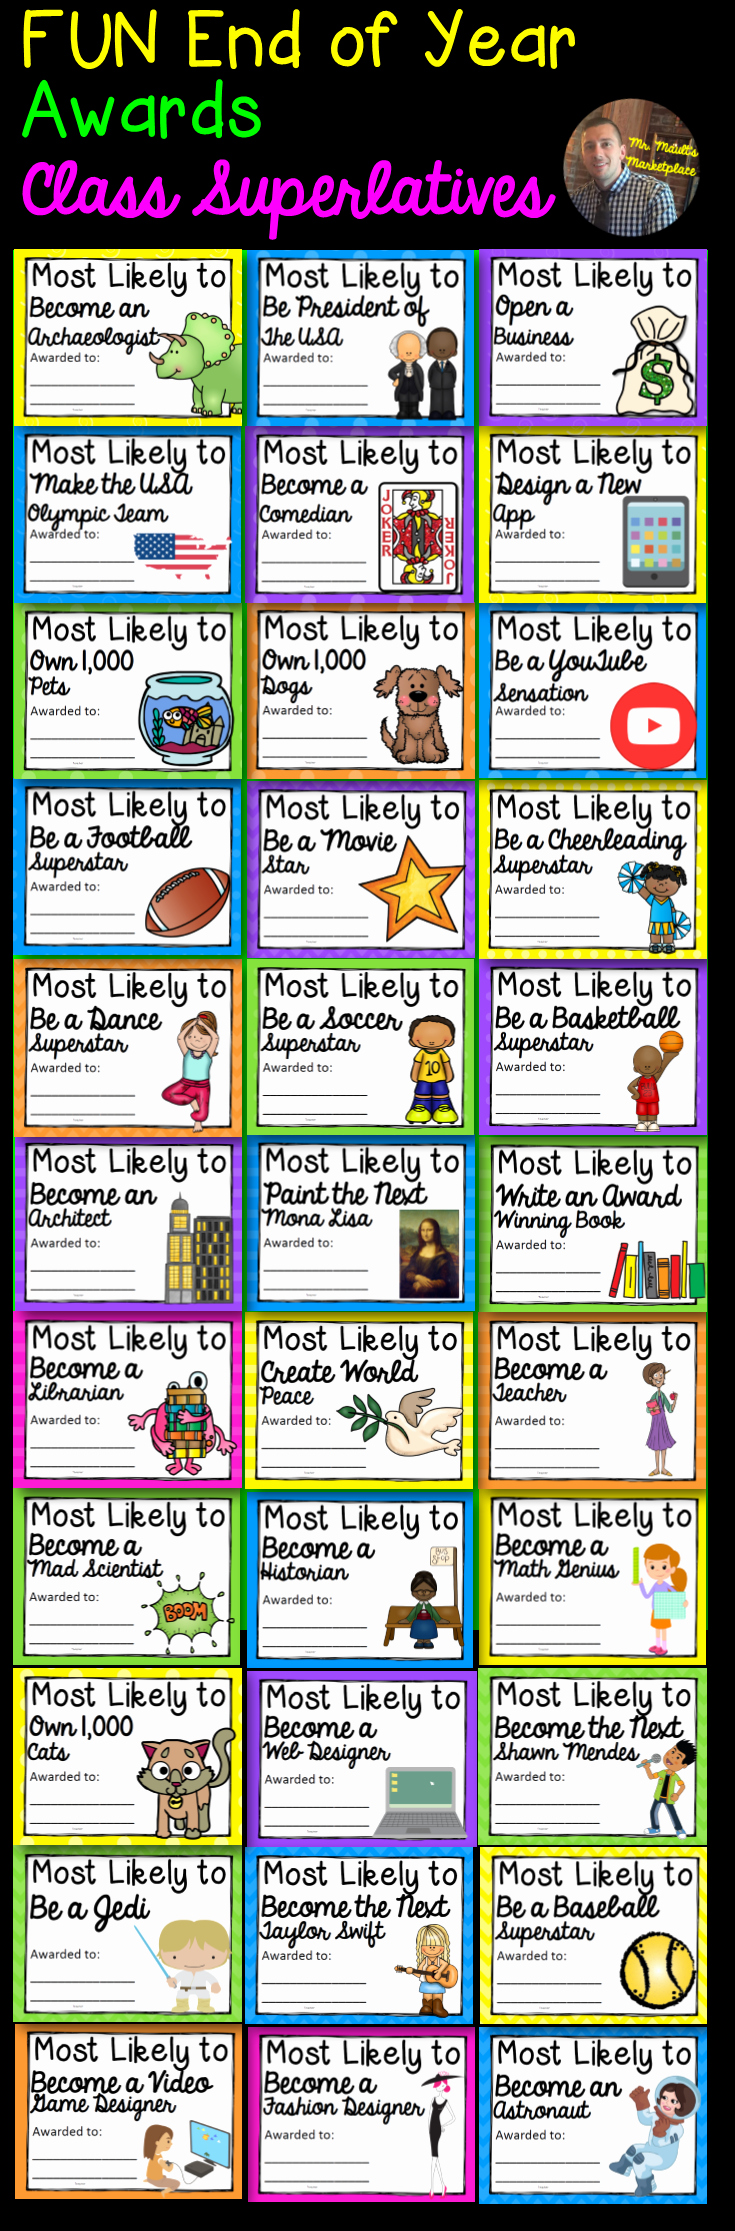 List Of Funny Awards for Students Lovely End Of Year Awards Fillable 62 Class Superlatives for